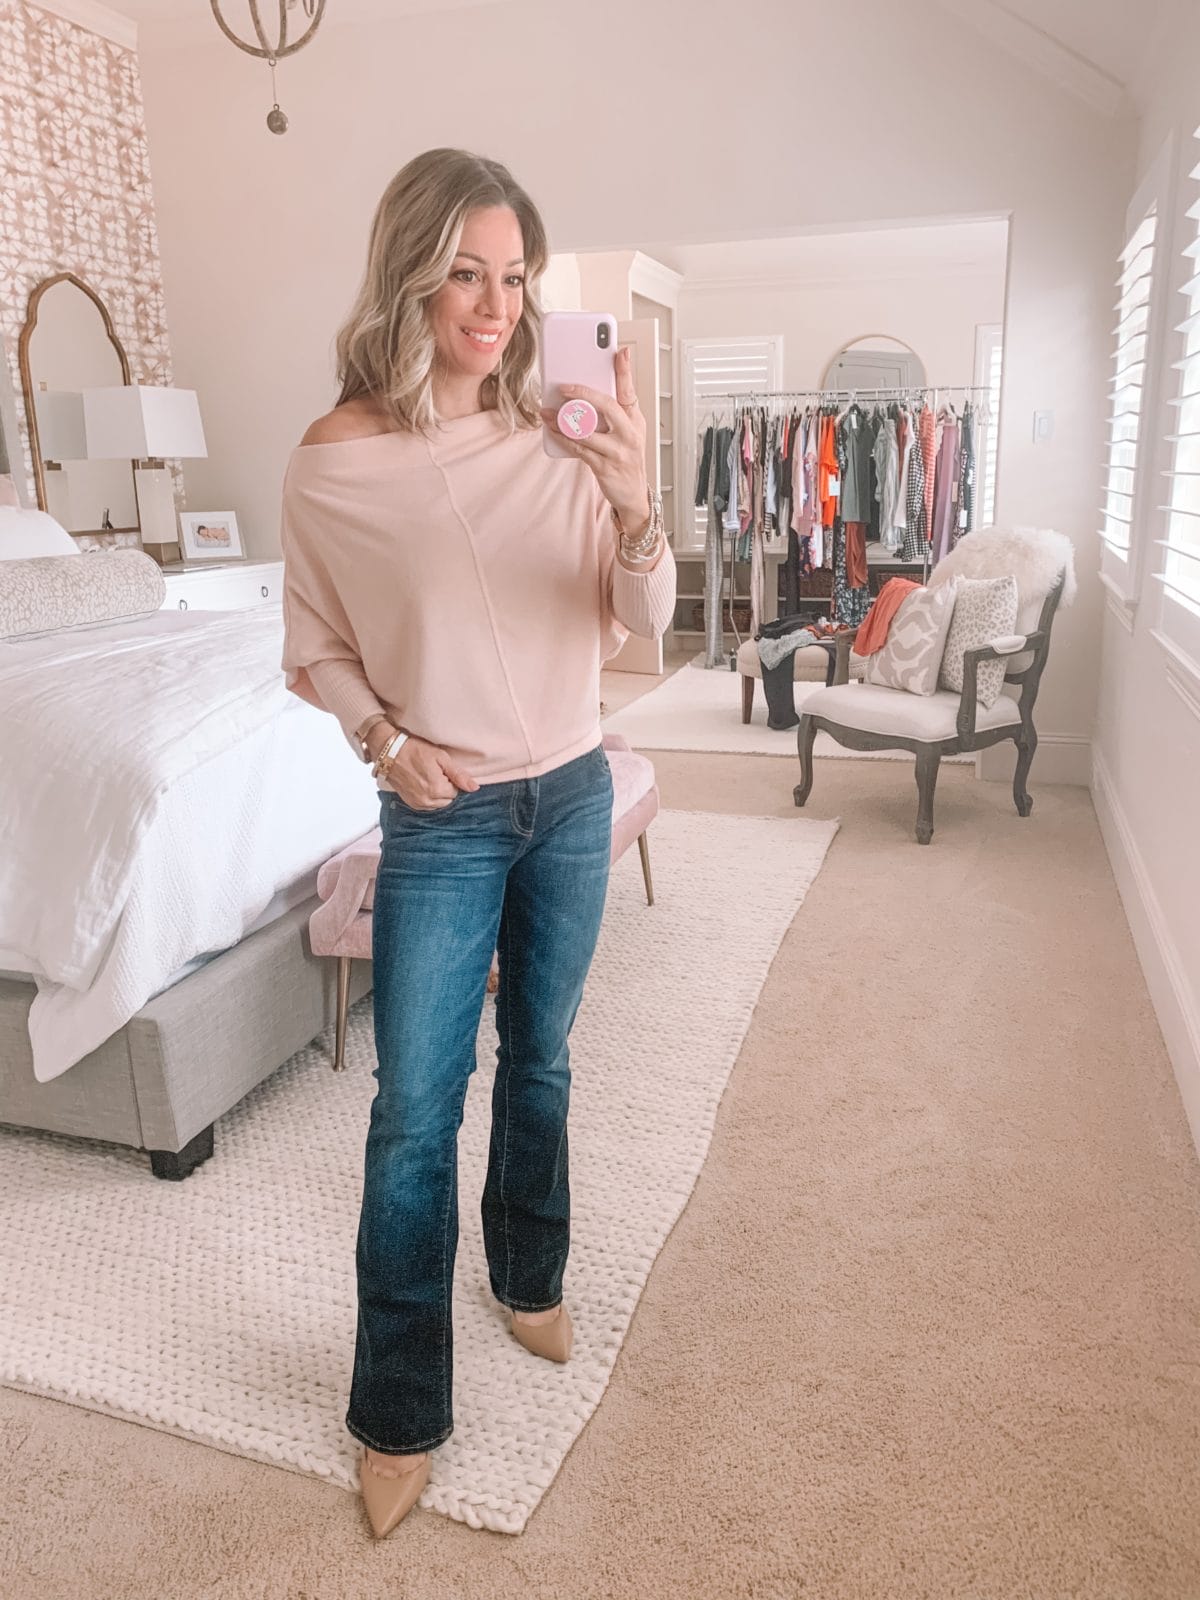 Dressing Room Finds Nordstrom and LOFT, Slouchy Long Sleeve Sweater, BootCut Jeans, Heels 